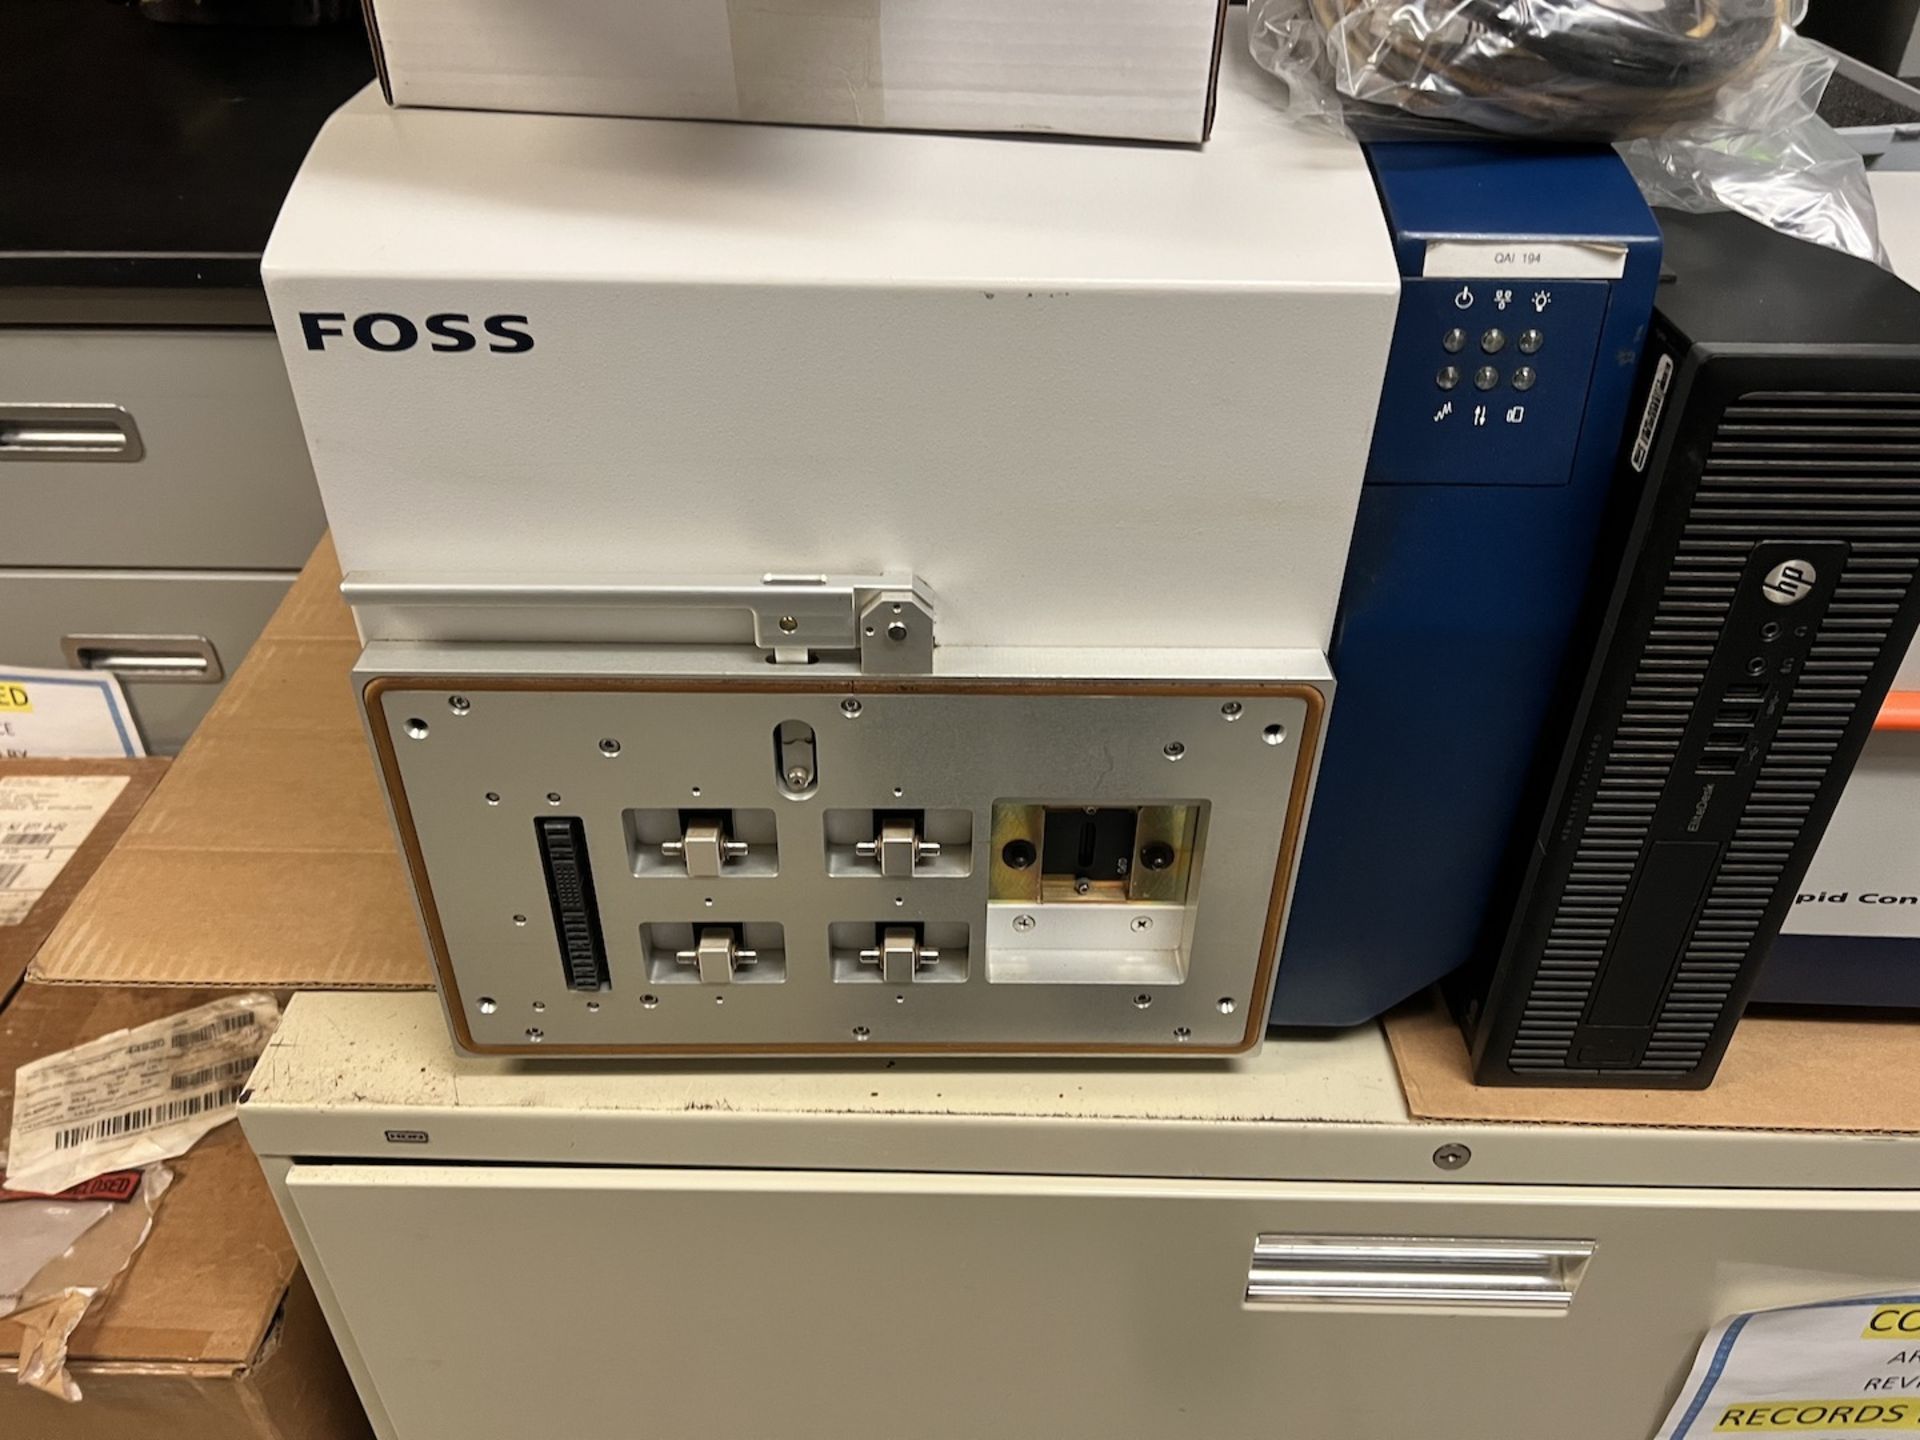 FOSS XDS NEAR INFRARED RAPID CONTENT ANALYZER WITH XDS MONOCROMATOR TYPE XM-1000, XM-1100 SERIES - Image 9 of 16